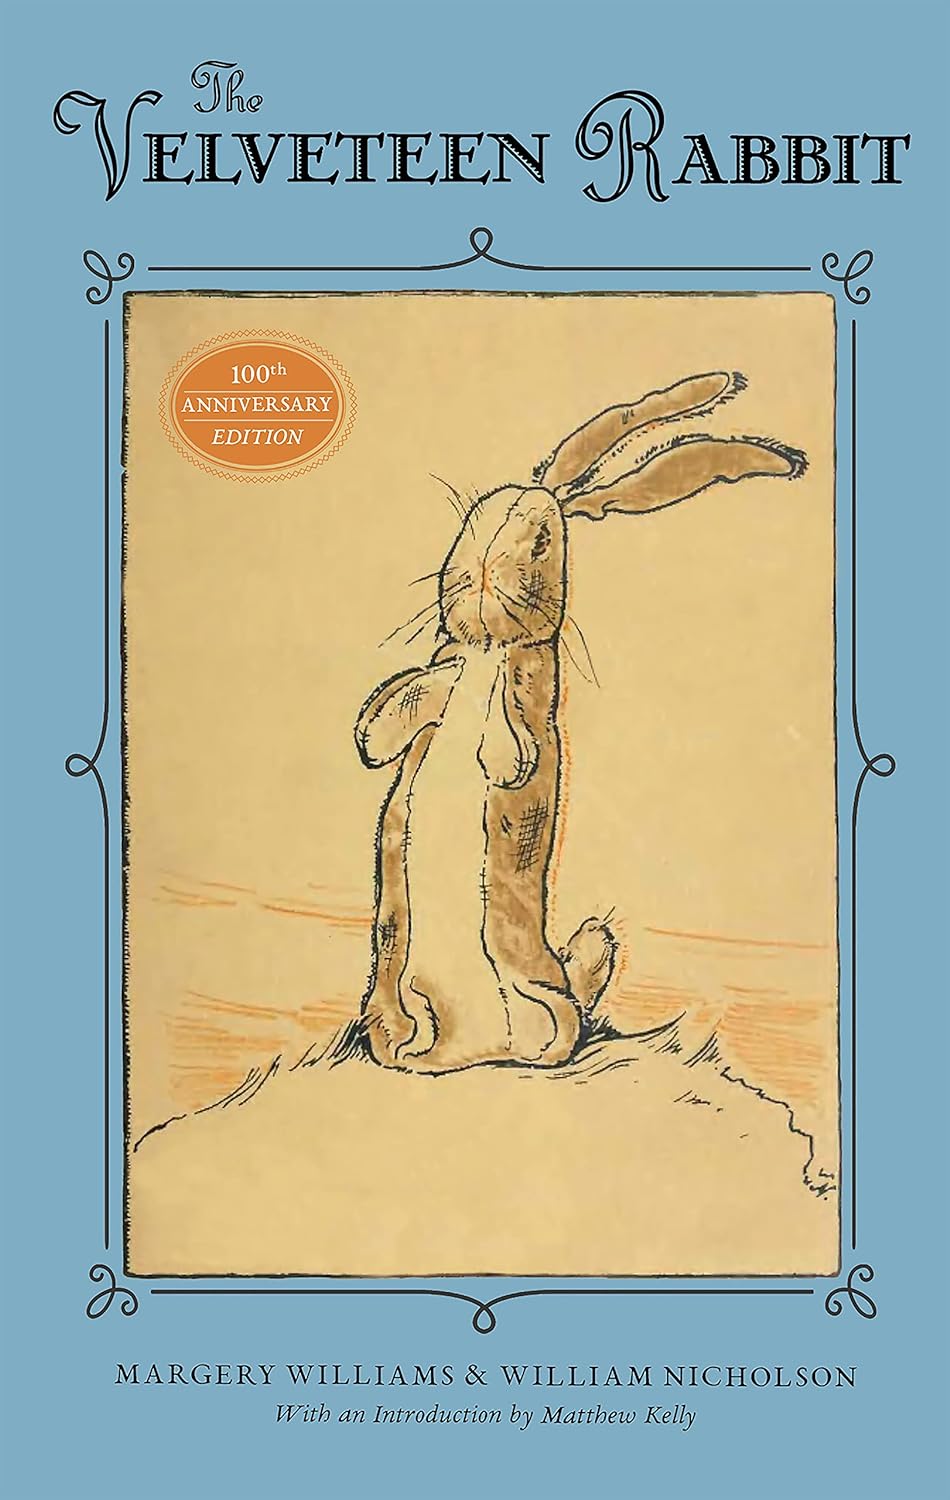 books about bunnies14